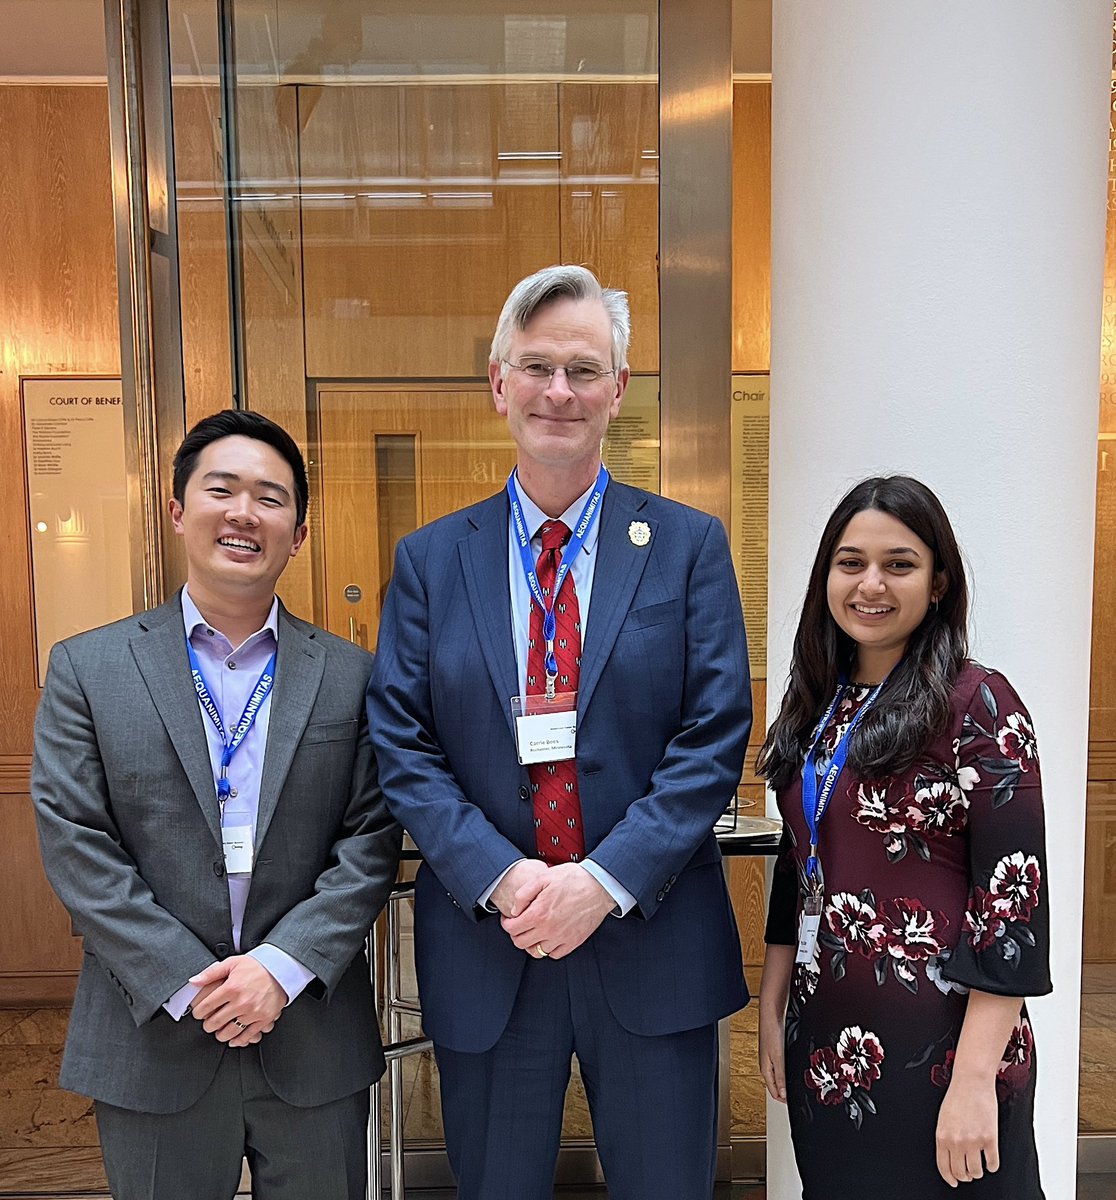 It’s an honor to serve on the @AmericanOsler Board of Governors with @priyasdave as medical students. The AOS is working hard to promote trainee involvement in the history of medicine & medical humanities! Thank you @ChrisBoesMD for the opportunity.